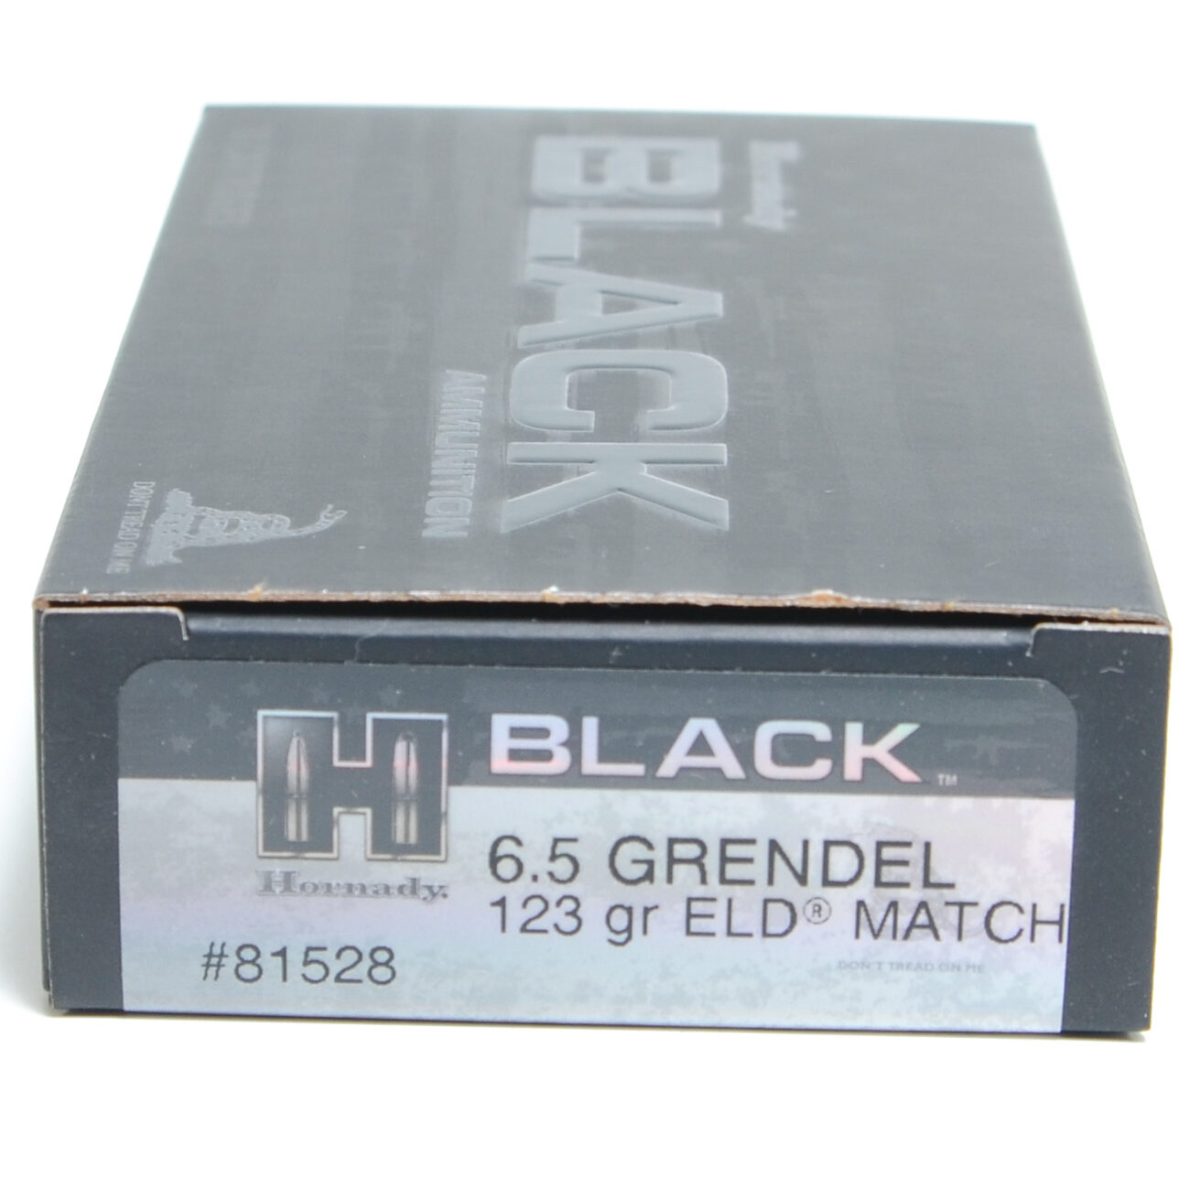 Cheap 6.5 Grendel 123 Grain ELD-M (Extremly Low Drag) Match Black Ammunition (500 Rounds) - Ammo master - Ammo Depot USA